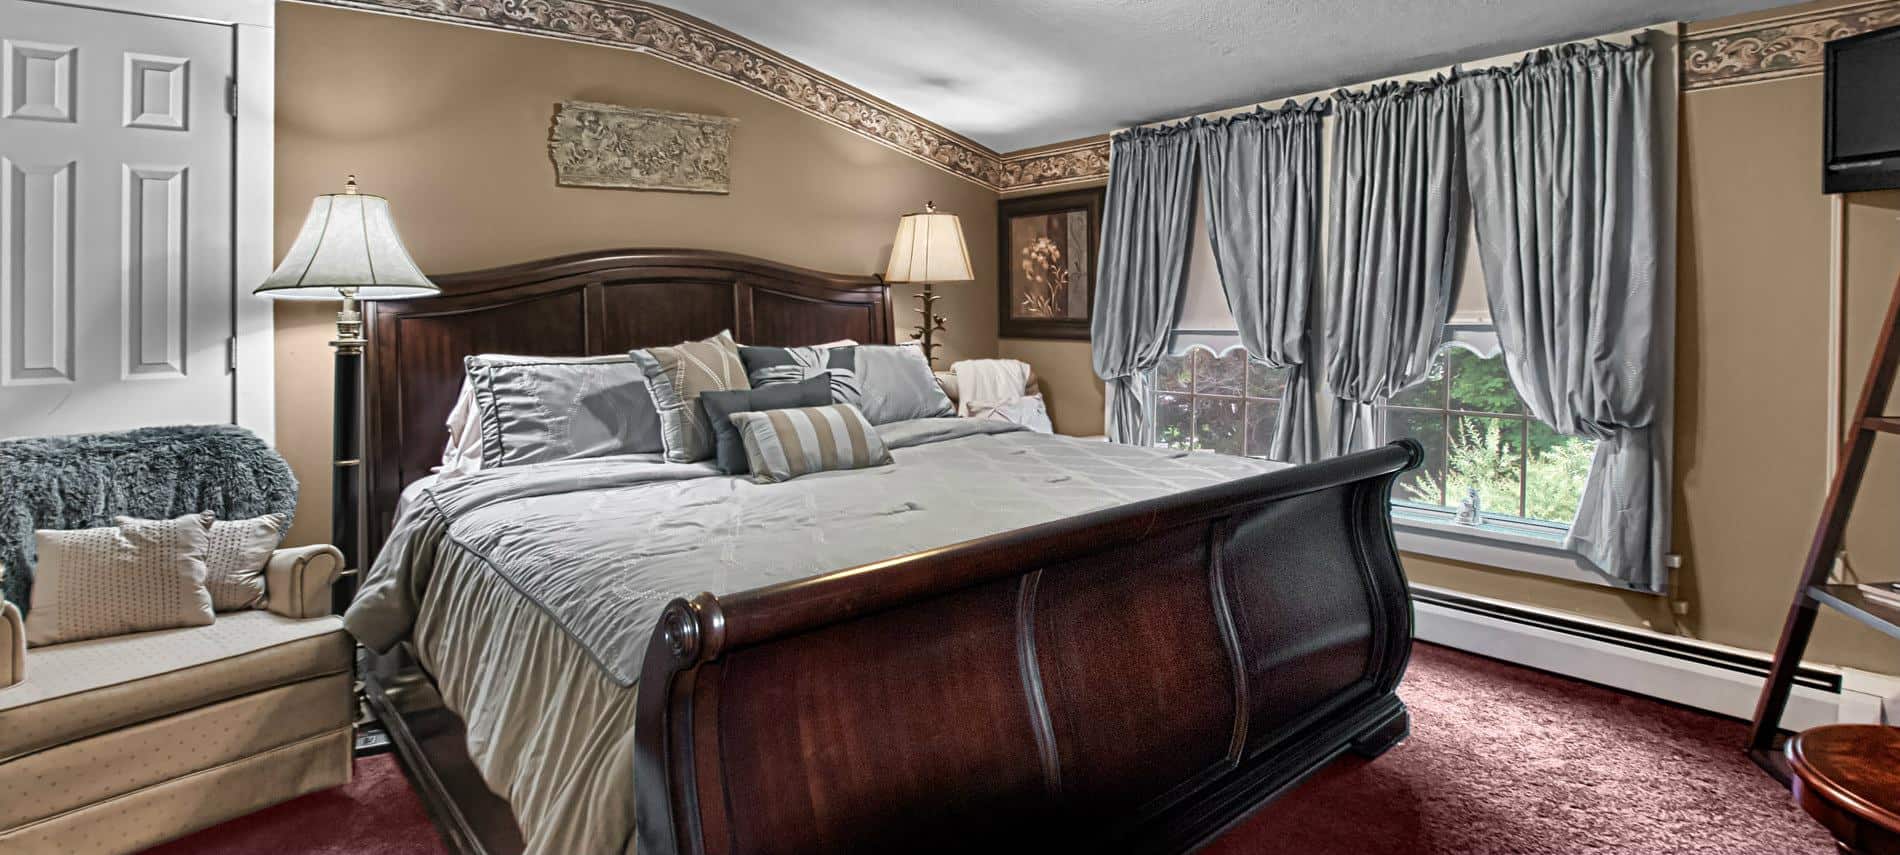 Elegant guest room with tan walls, burgundy carpet, double window, sleigh bed and upholstered chair